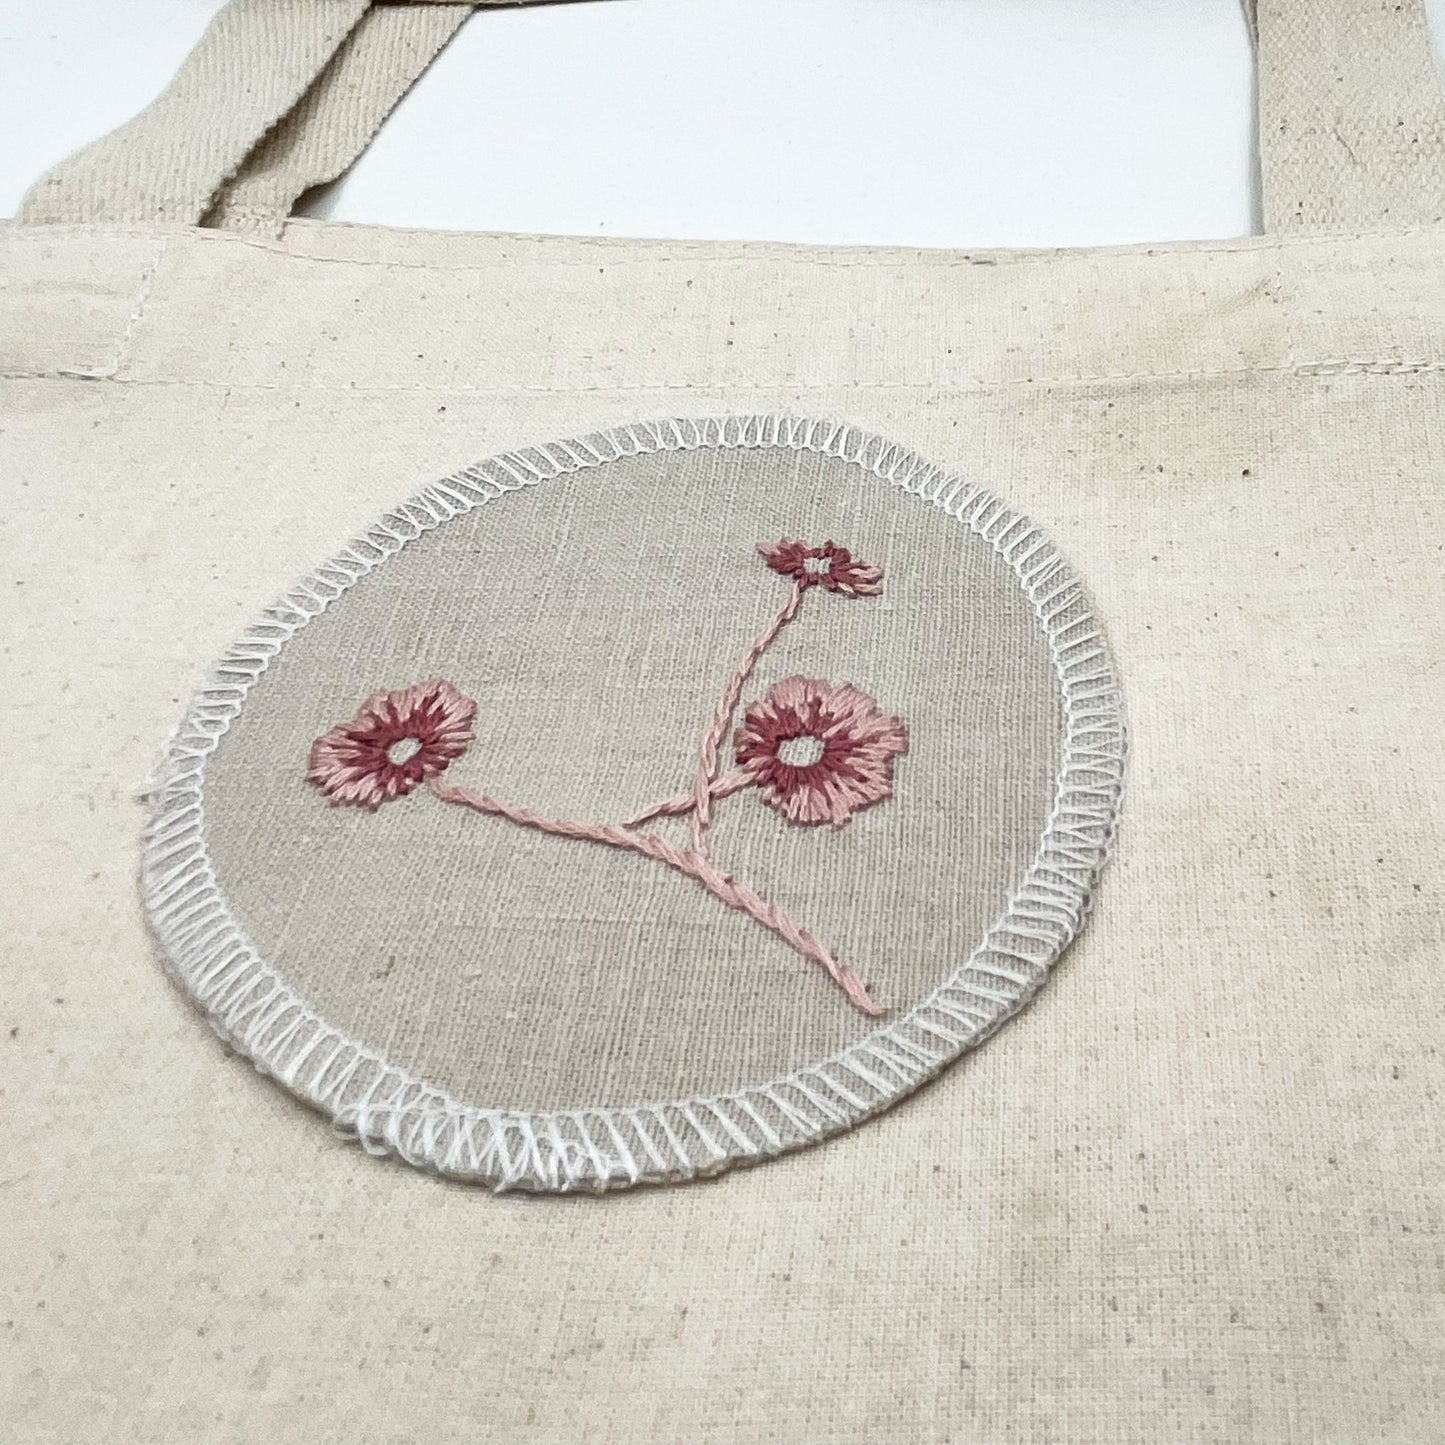 a patch made from a natural color linen fabric on a canvas tote bag, hand embroidered with 3 poppies in shades of pink, edges overlocked with white thread, on a white background